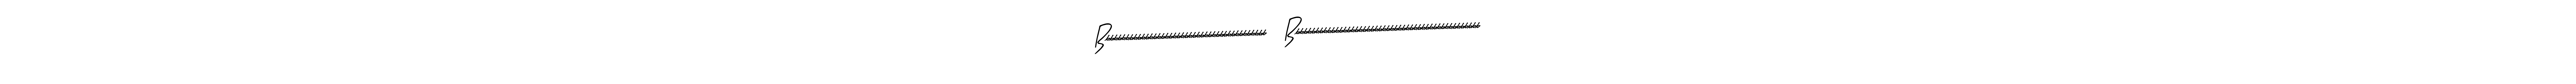 How to make Bbbbbbbbbbbbbbbbbbbbbbbbbbbbbbbbbbbbbbbbbb! Bbbbbbbbbbbbbbbbbbbbbbbbbbbbbbbbbbbbbbbbbbbbbbbb signature? Arty Signature is a professional autograph style. Create handwritten signature for Bbbbbbbbbbbbbbbbbbbbbbbbbbbbbbbbbbbbbbbbbb! Bbbbbbbbbbbbbbbbbbbbbbbbbbbbbbbbbbbbbbbbbbbbbbbb name. Bbbbbbbbbbbbbbbbbbbbbbbbbbbbbbbbbbbbbbbbbb! Bbbbbbbbbbbbbbbbbbbbbbbbbbbbbbbbbbbbbbbbbbbbbbbb signature style 8 images and pictures png